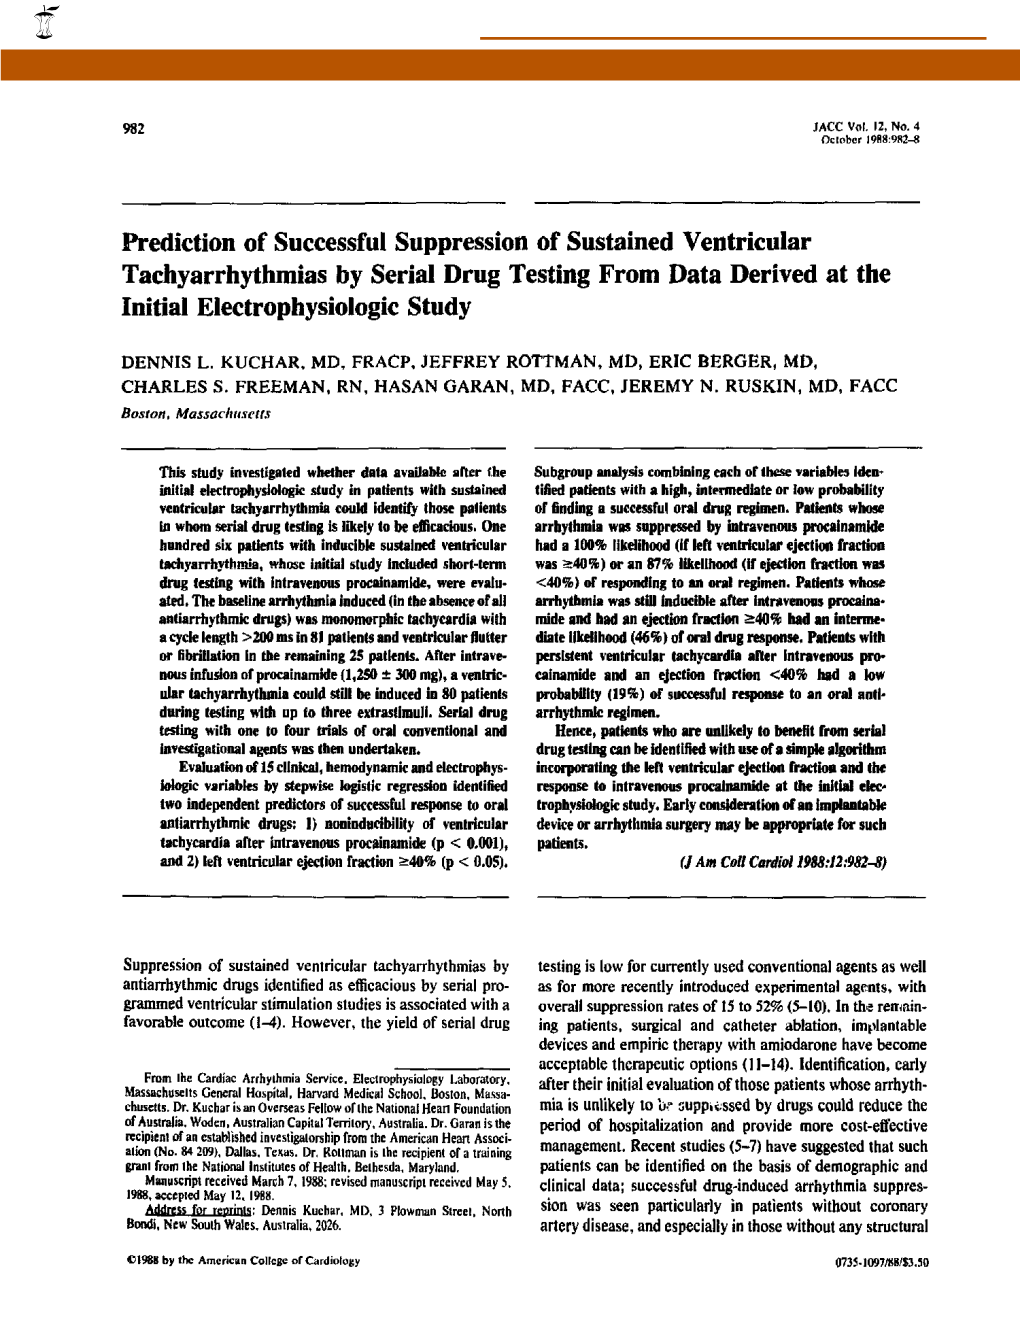 Prediction of Successful Suppression of Sustained Ventricular Tachyarrhythmias by Serial Drug Testing from Data Derived at the Initial Electrophysiologic Study